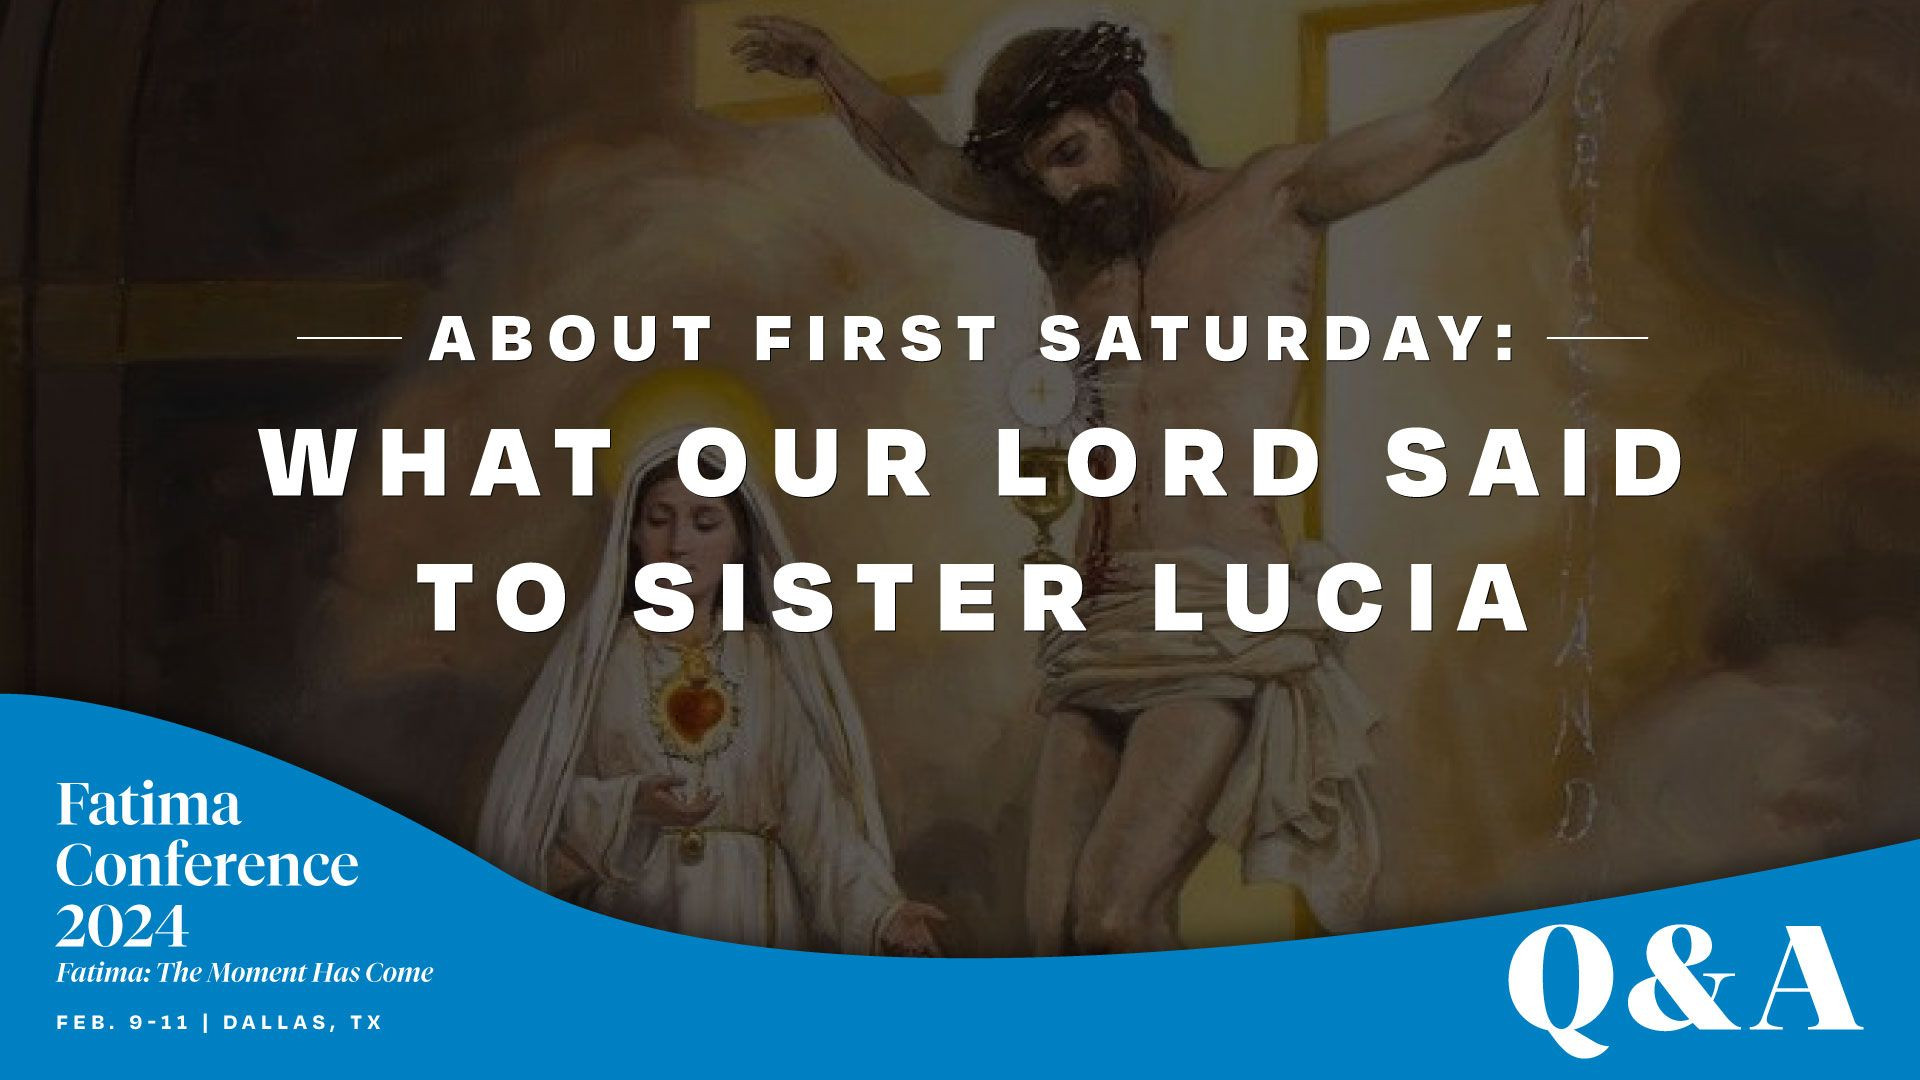 ⁣This is what Our Lord said to Sister Lucia about First Saturday